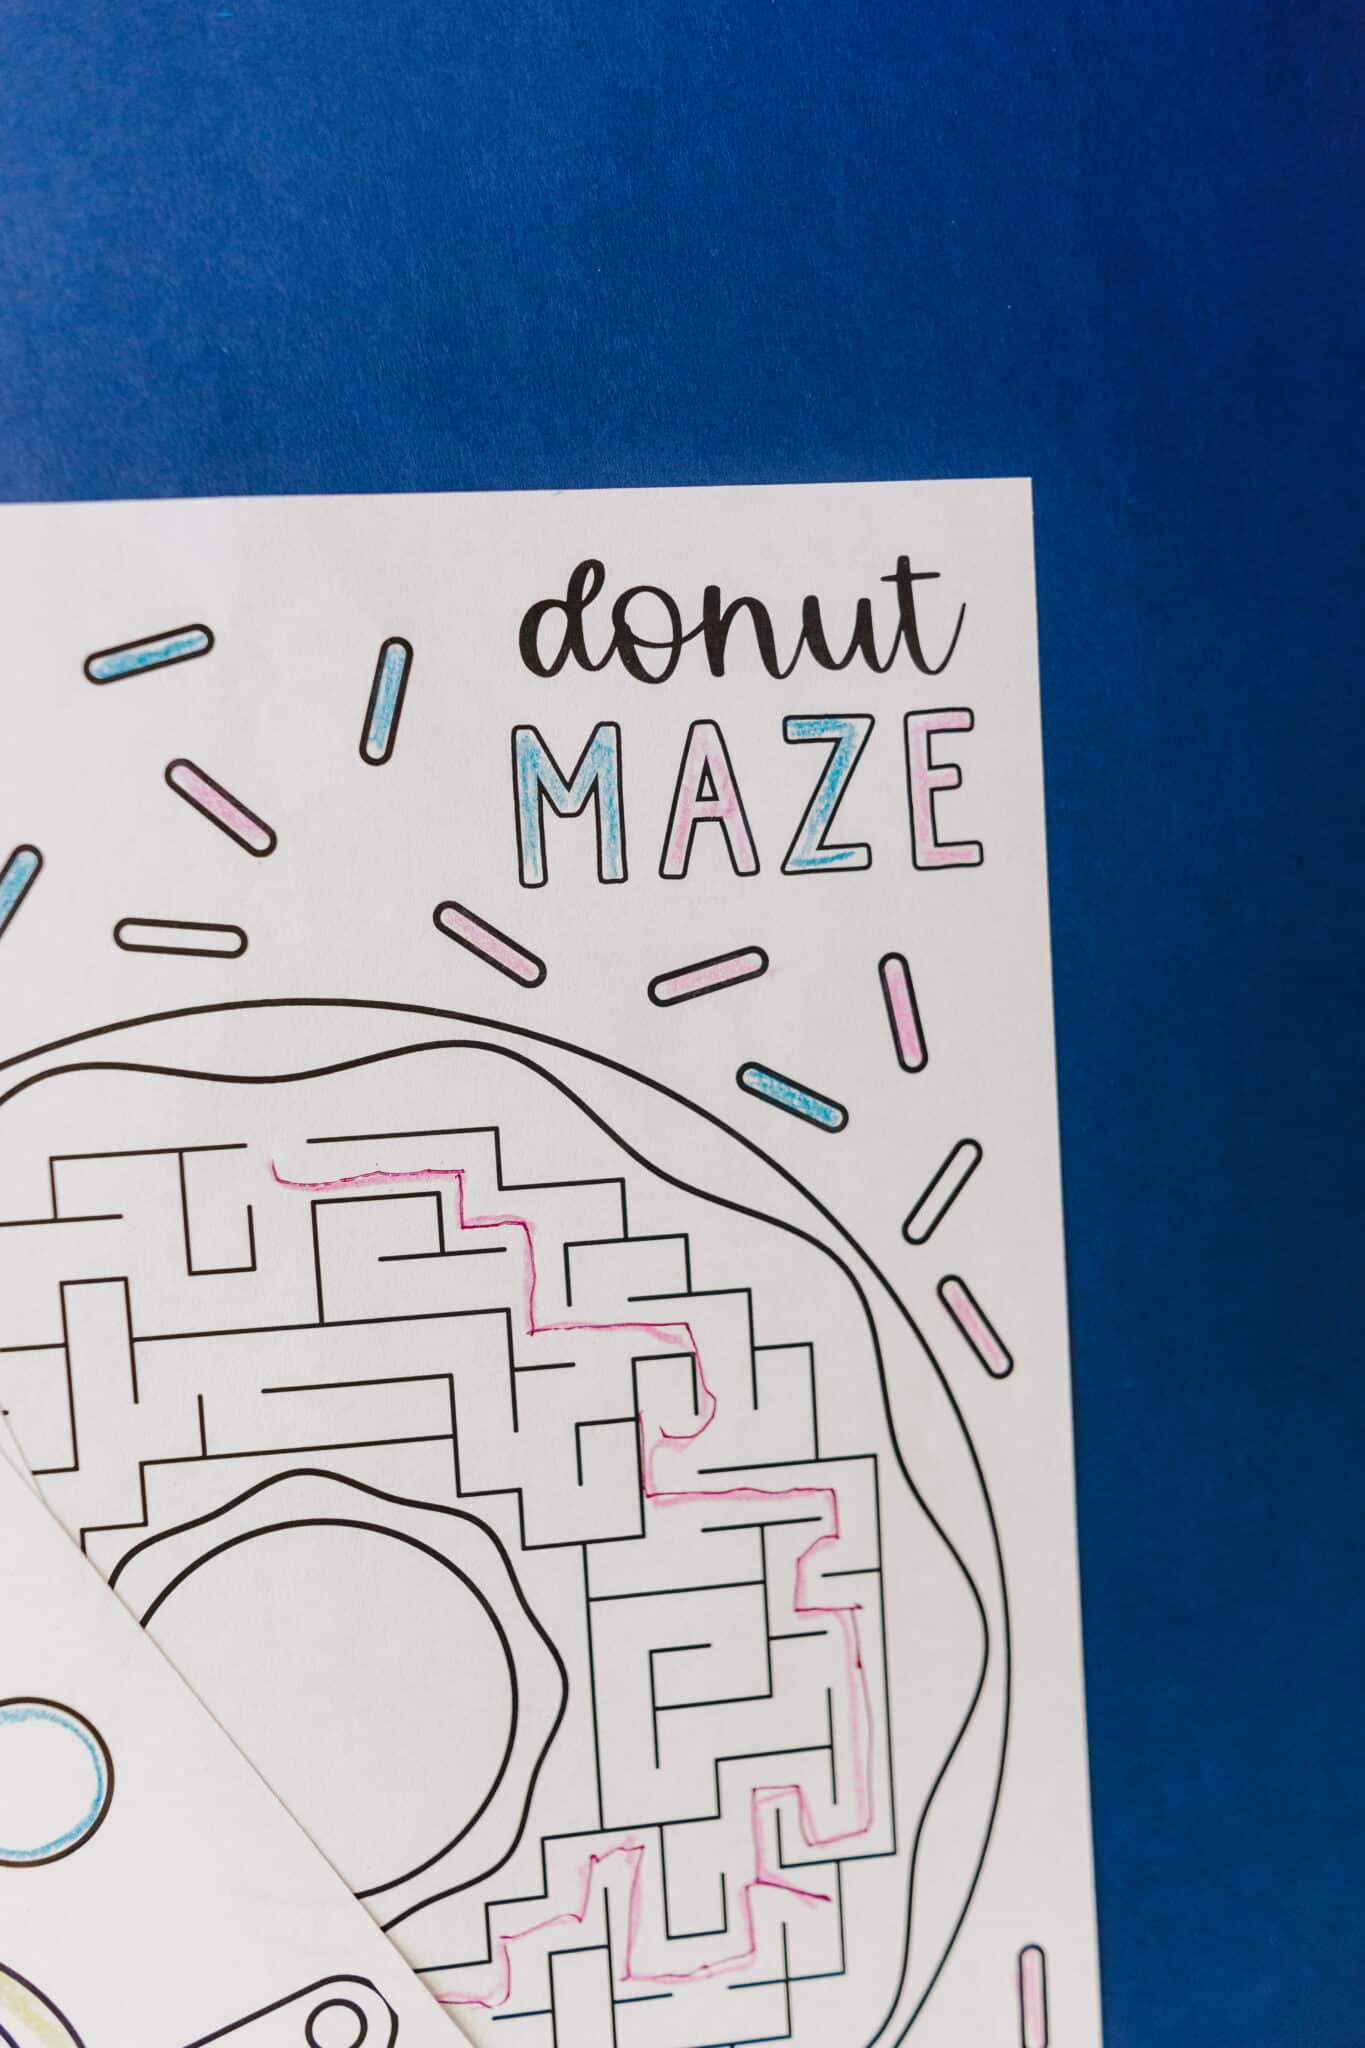 Free Printable Mazes That Kids of All Ages Will Love  Mazes for kids  printable, Printable mazes, Mazes for kids